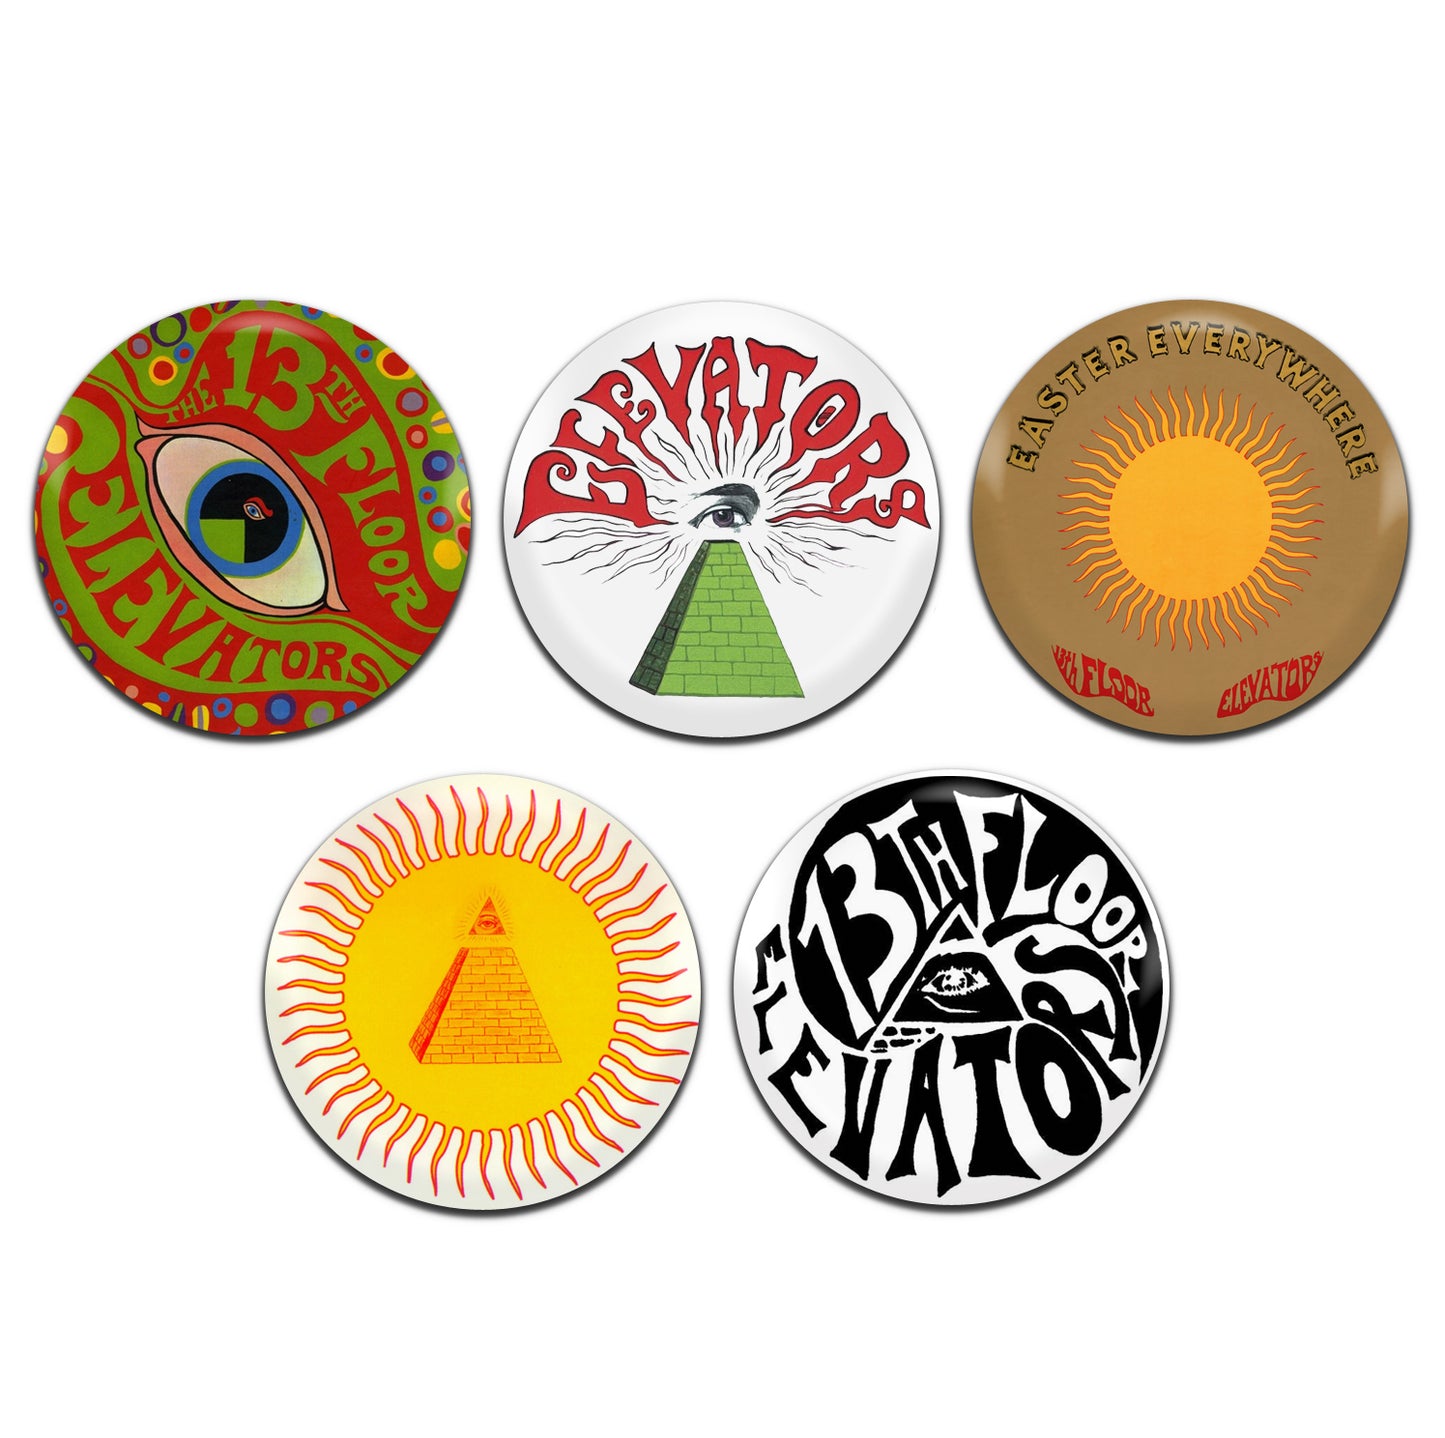 13th Floor Elevators Psychedelic Rock Band 60's 25mm / 1 Inch D-Pin Button Badges  (5x Set)